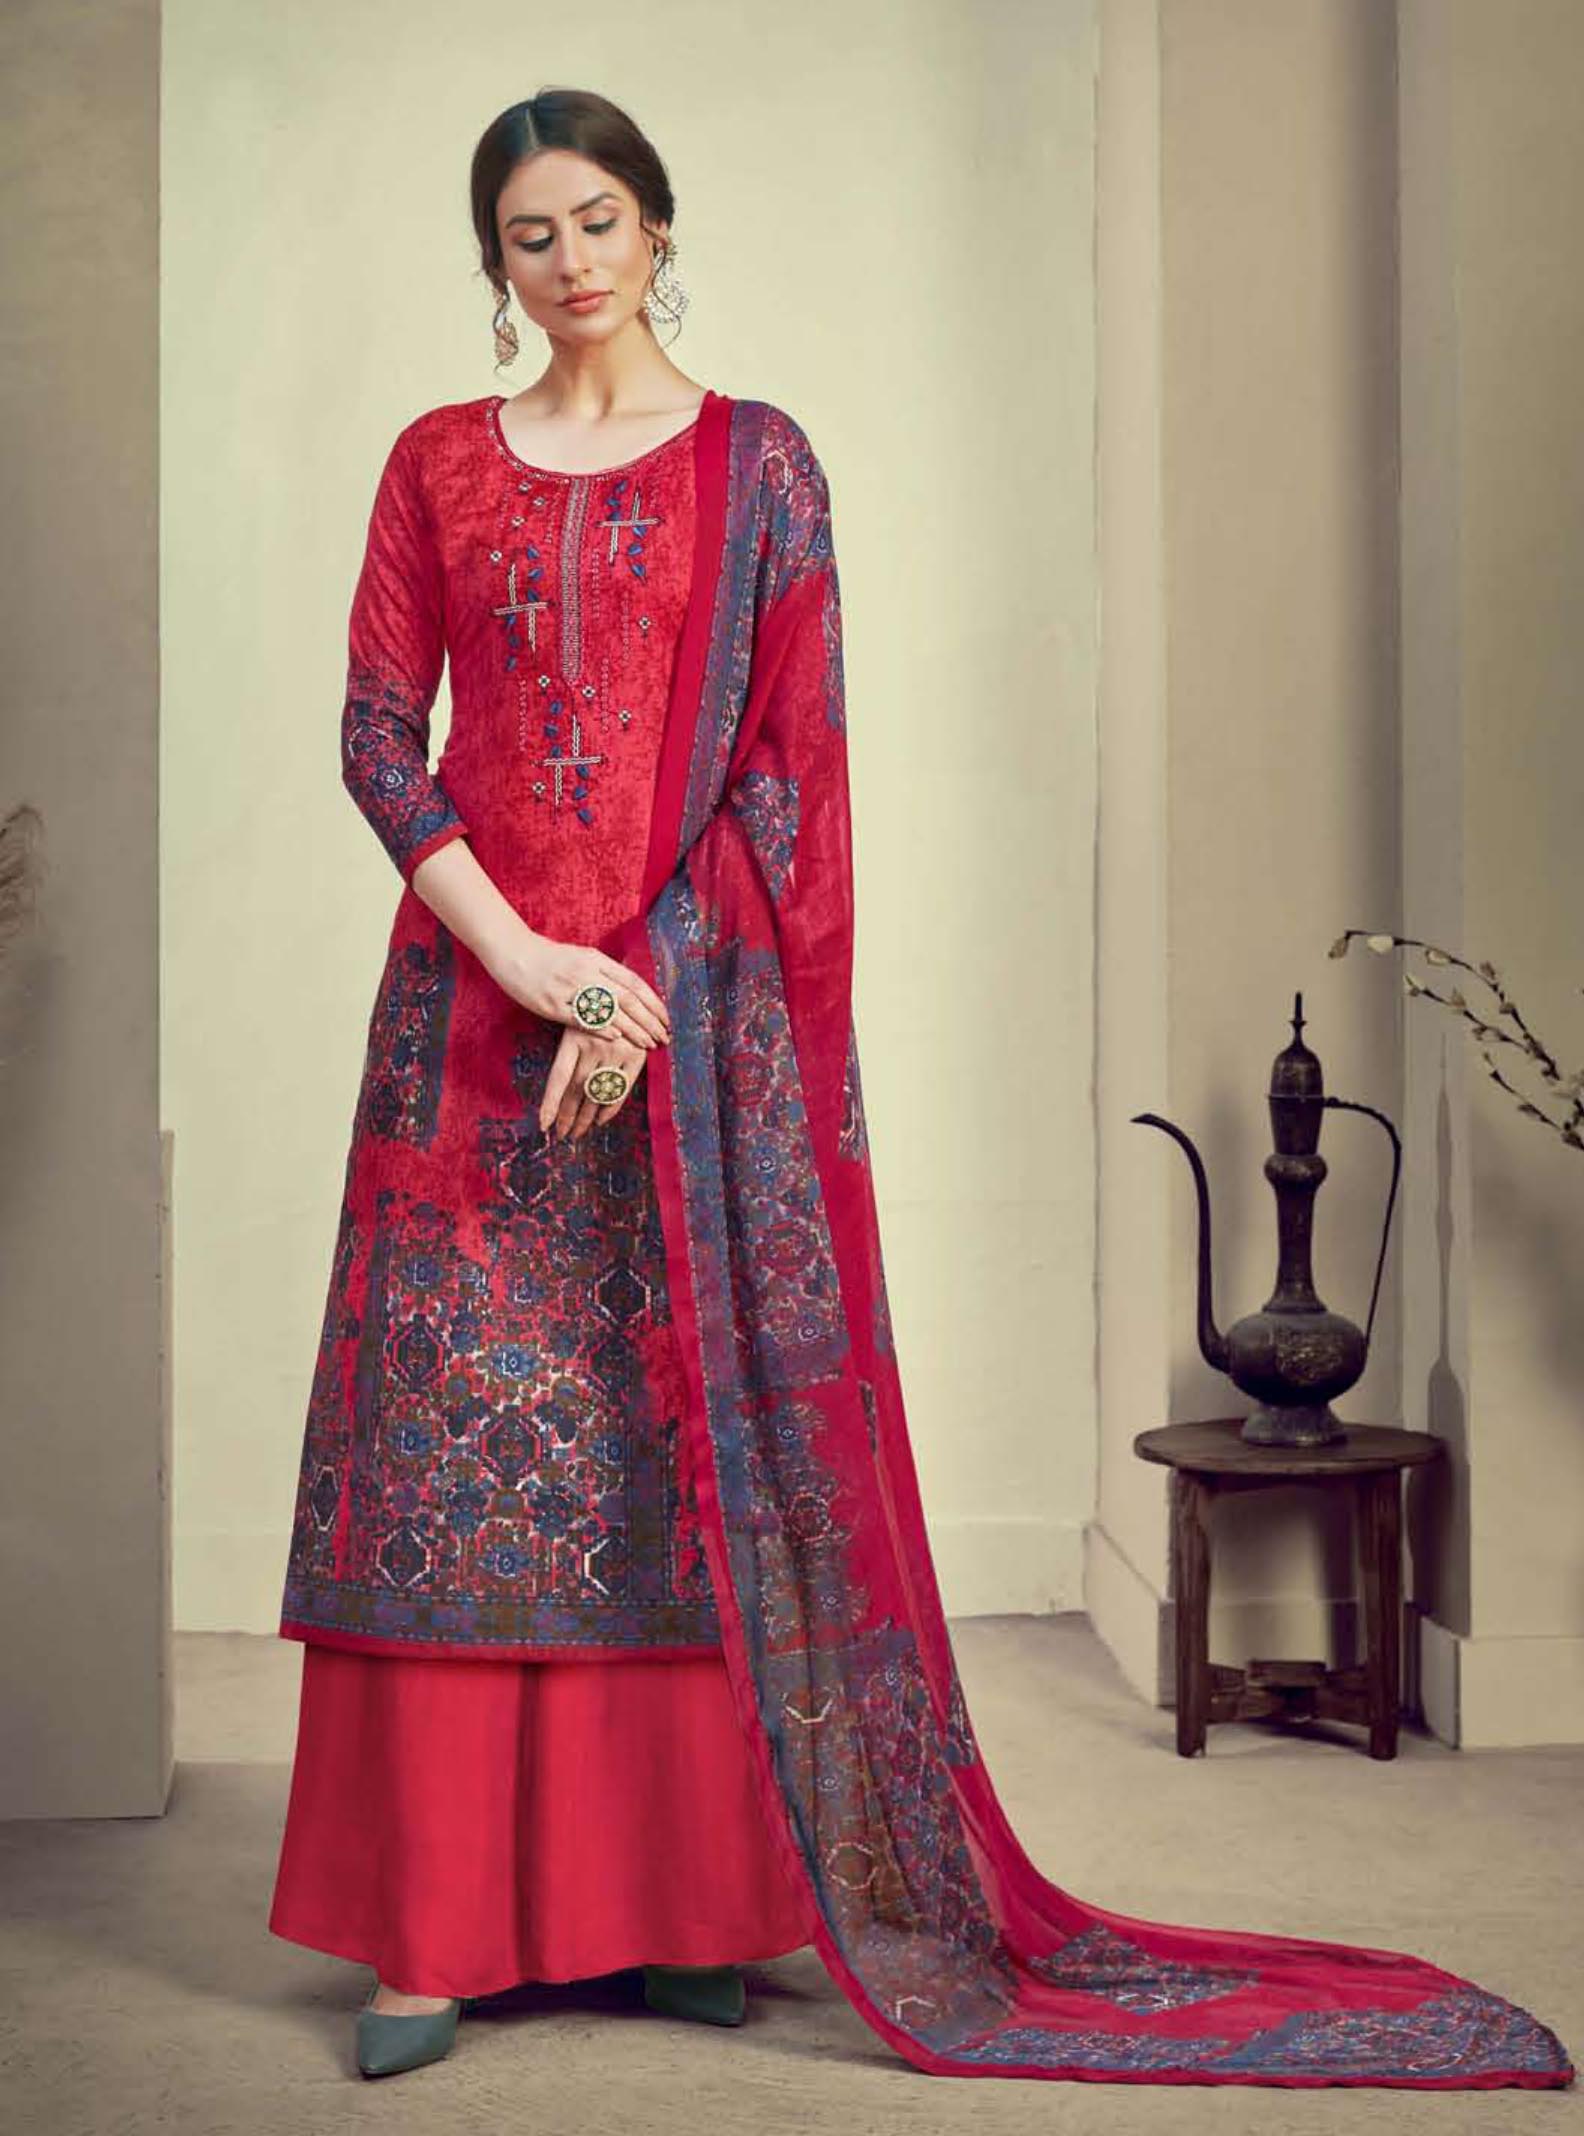 Unstitched Red Cotton Embroidery Suits Dress Materials - Stilento